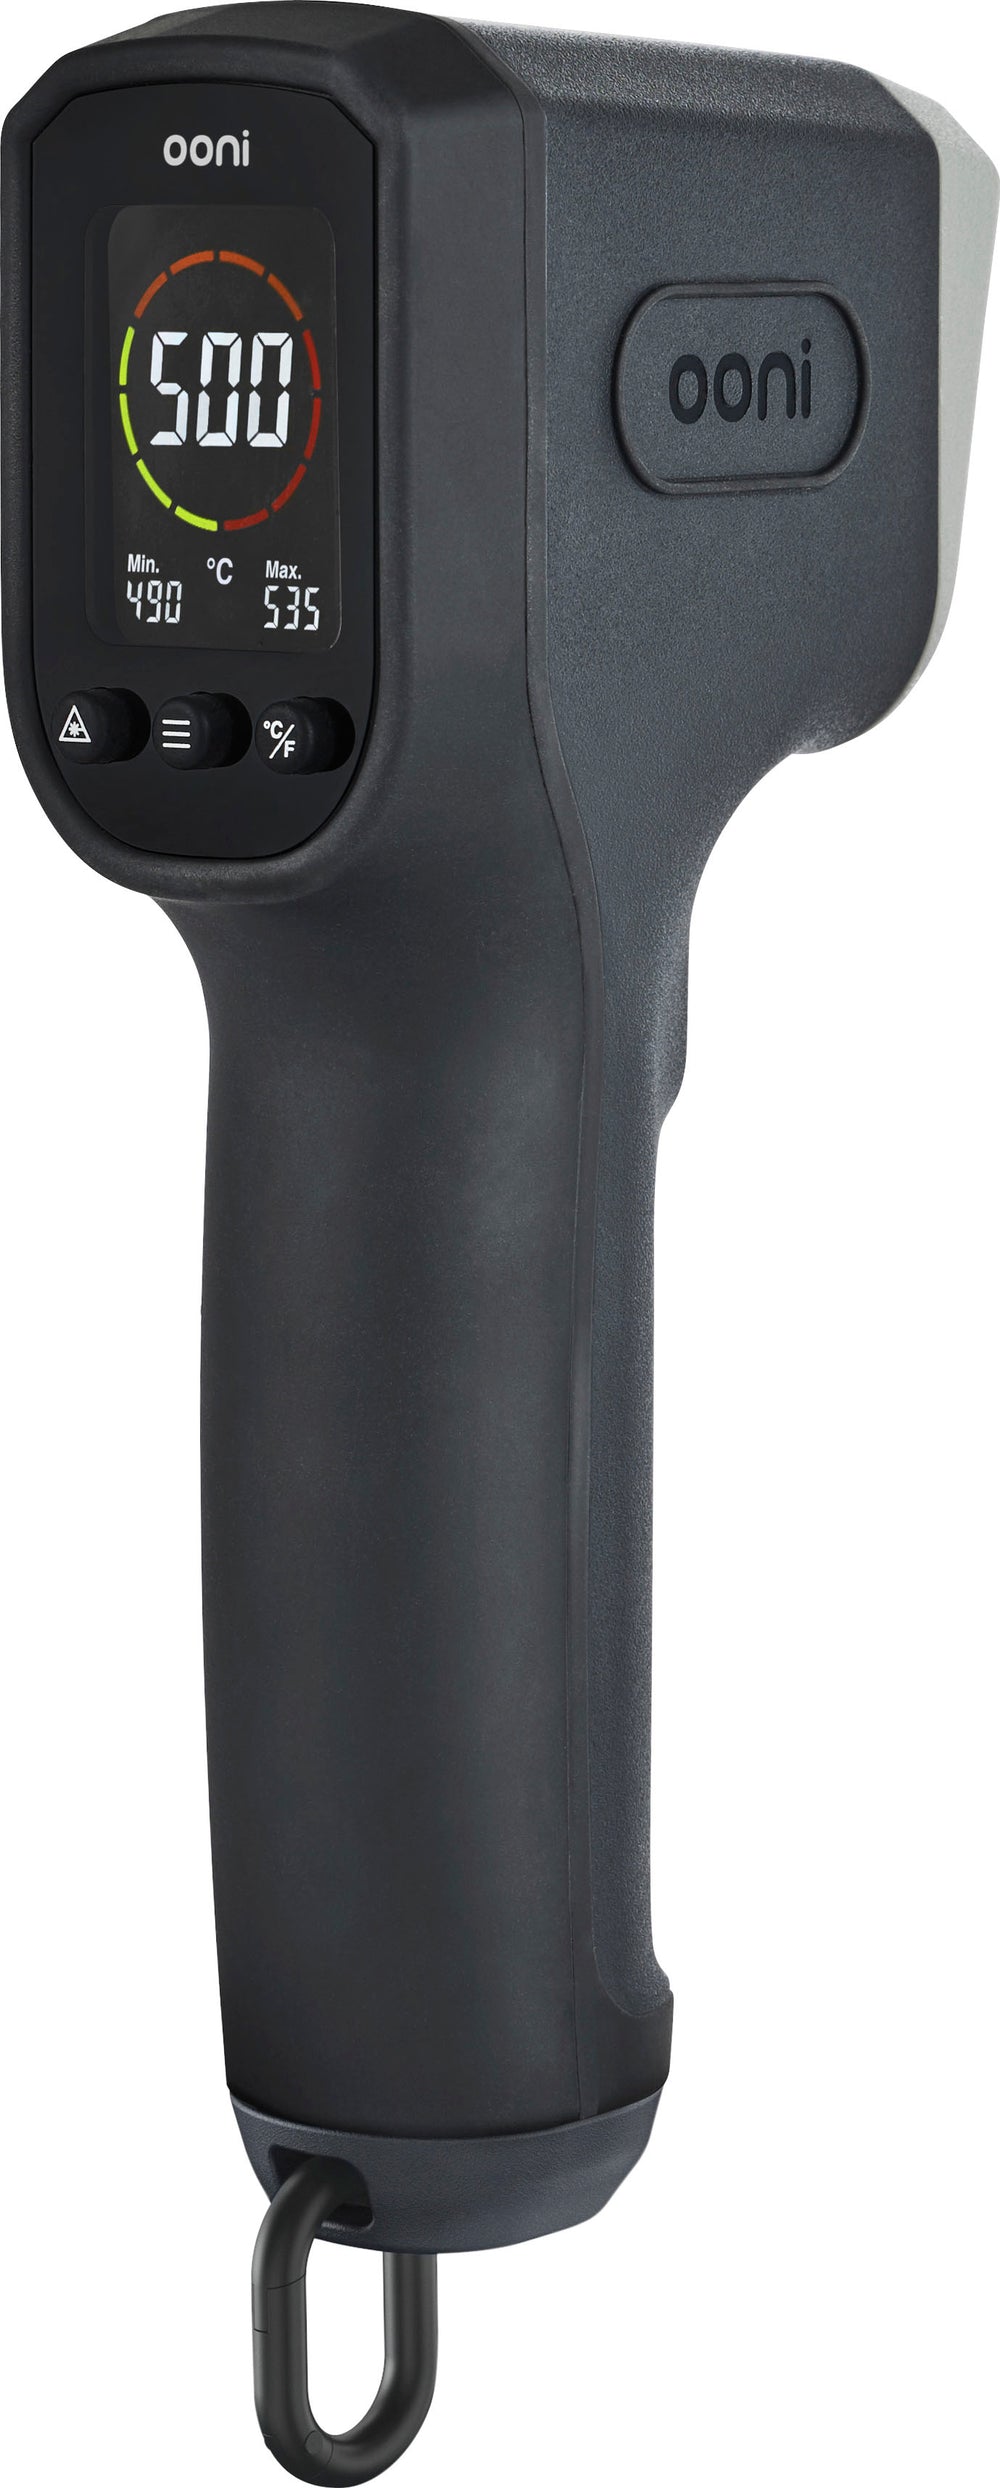 Ooni - Digital Infrared Thermometer - Black_1